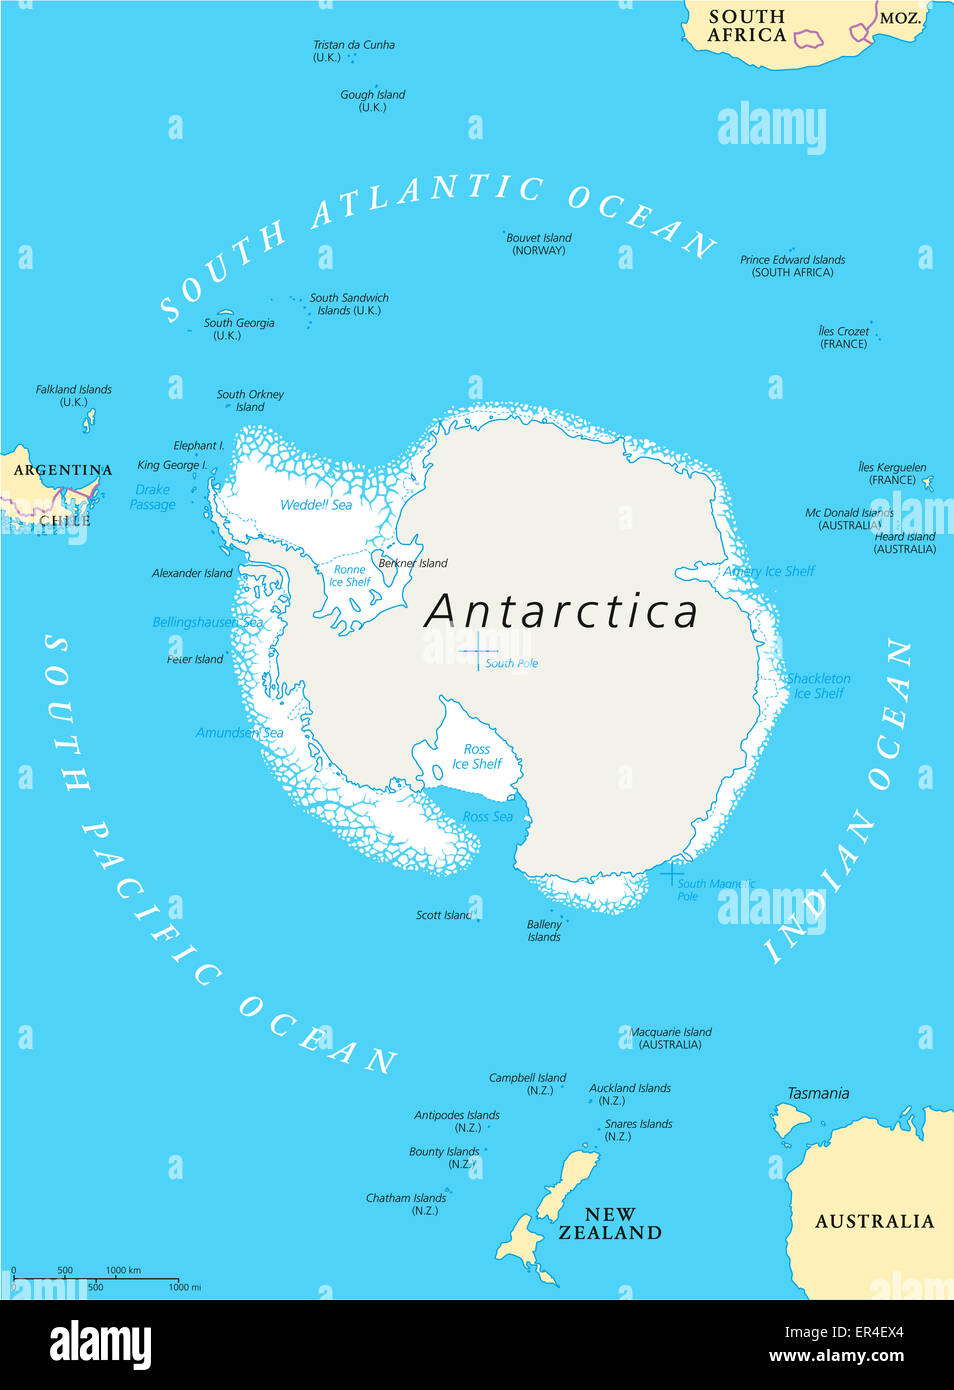 Antarctic Region Political Map with south pole, ice shelfs and islands. English labeling and scaling. Illustration. Stock Photo